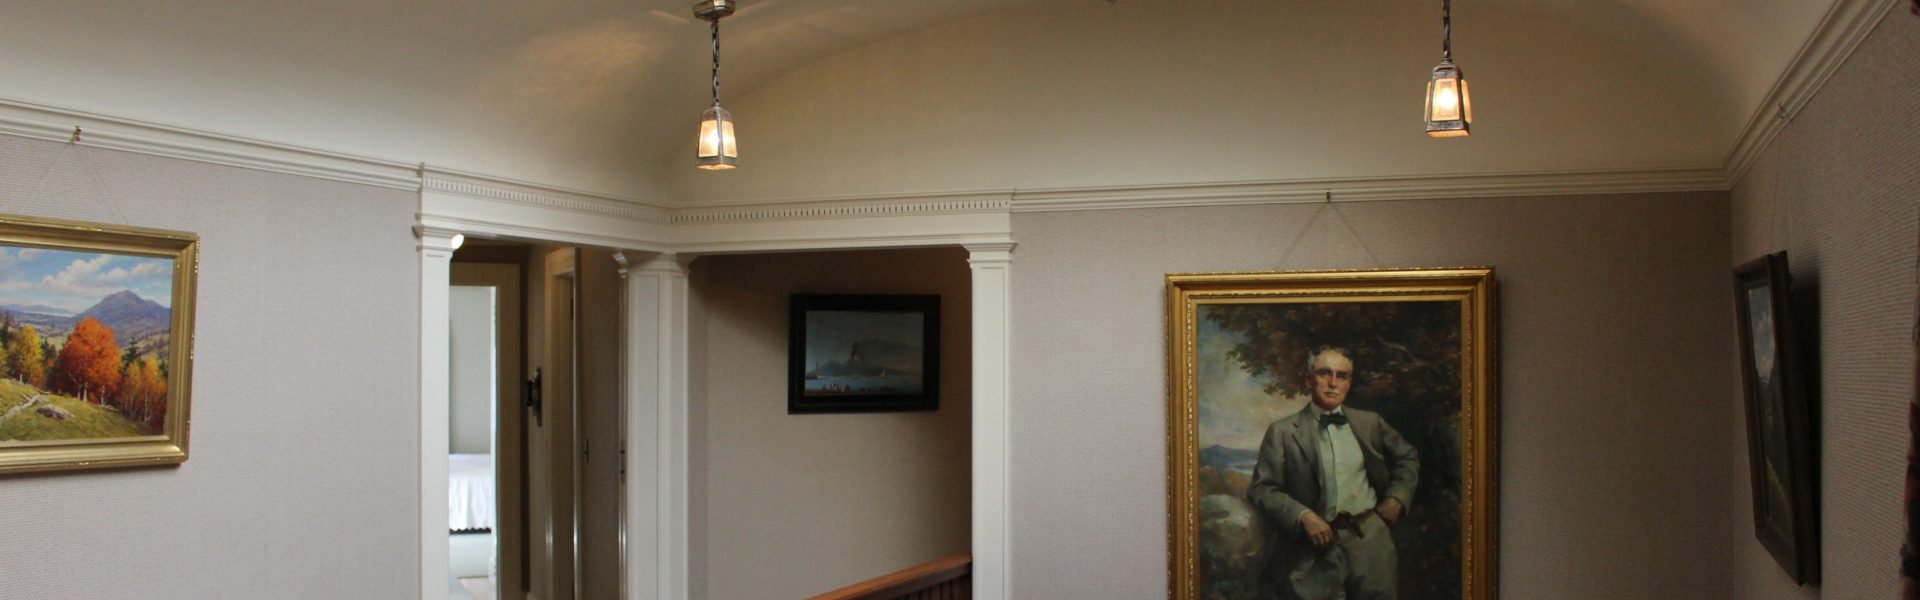 Staircase hall landing facing the guest wing. Tom Plant's portrait hangs near center to the image, Tiffany stained glass ceiling is visible.